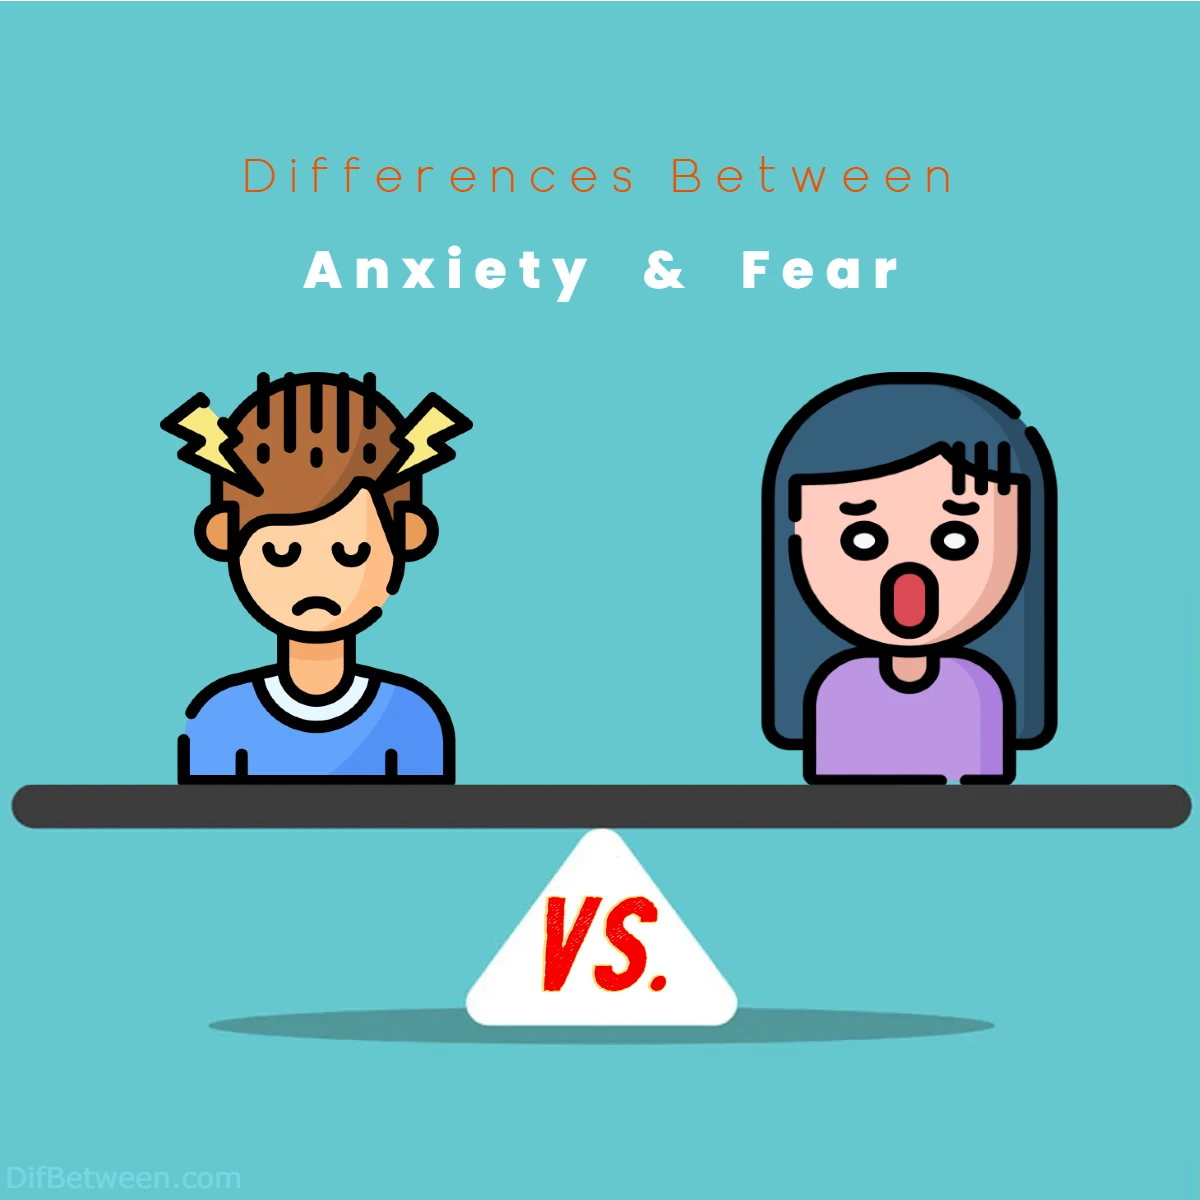 Differences Between Anxiety vs Fear